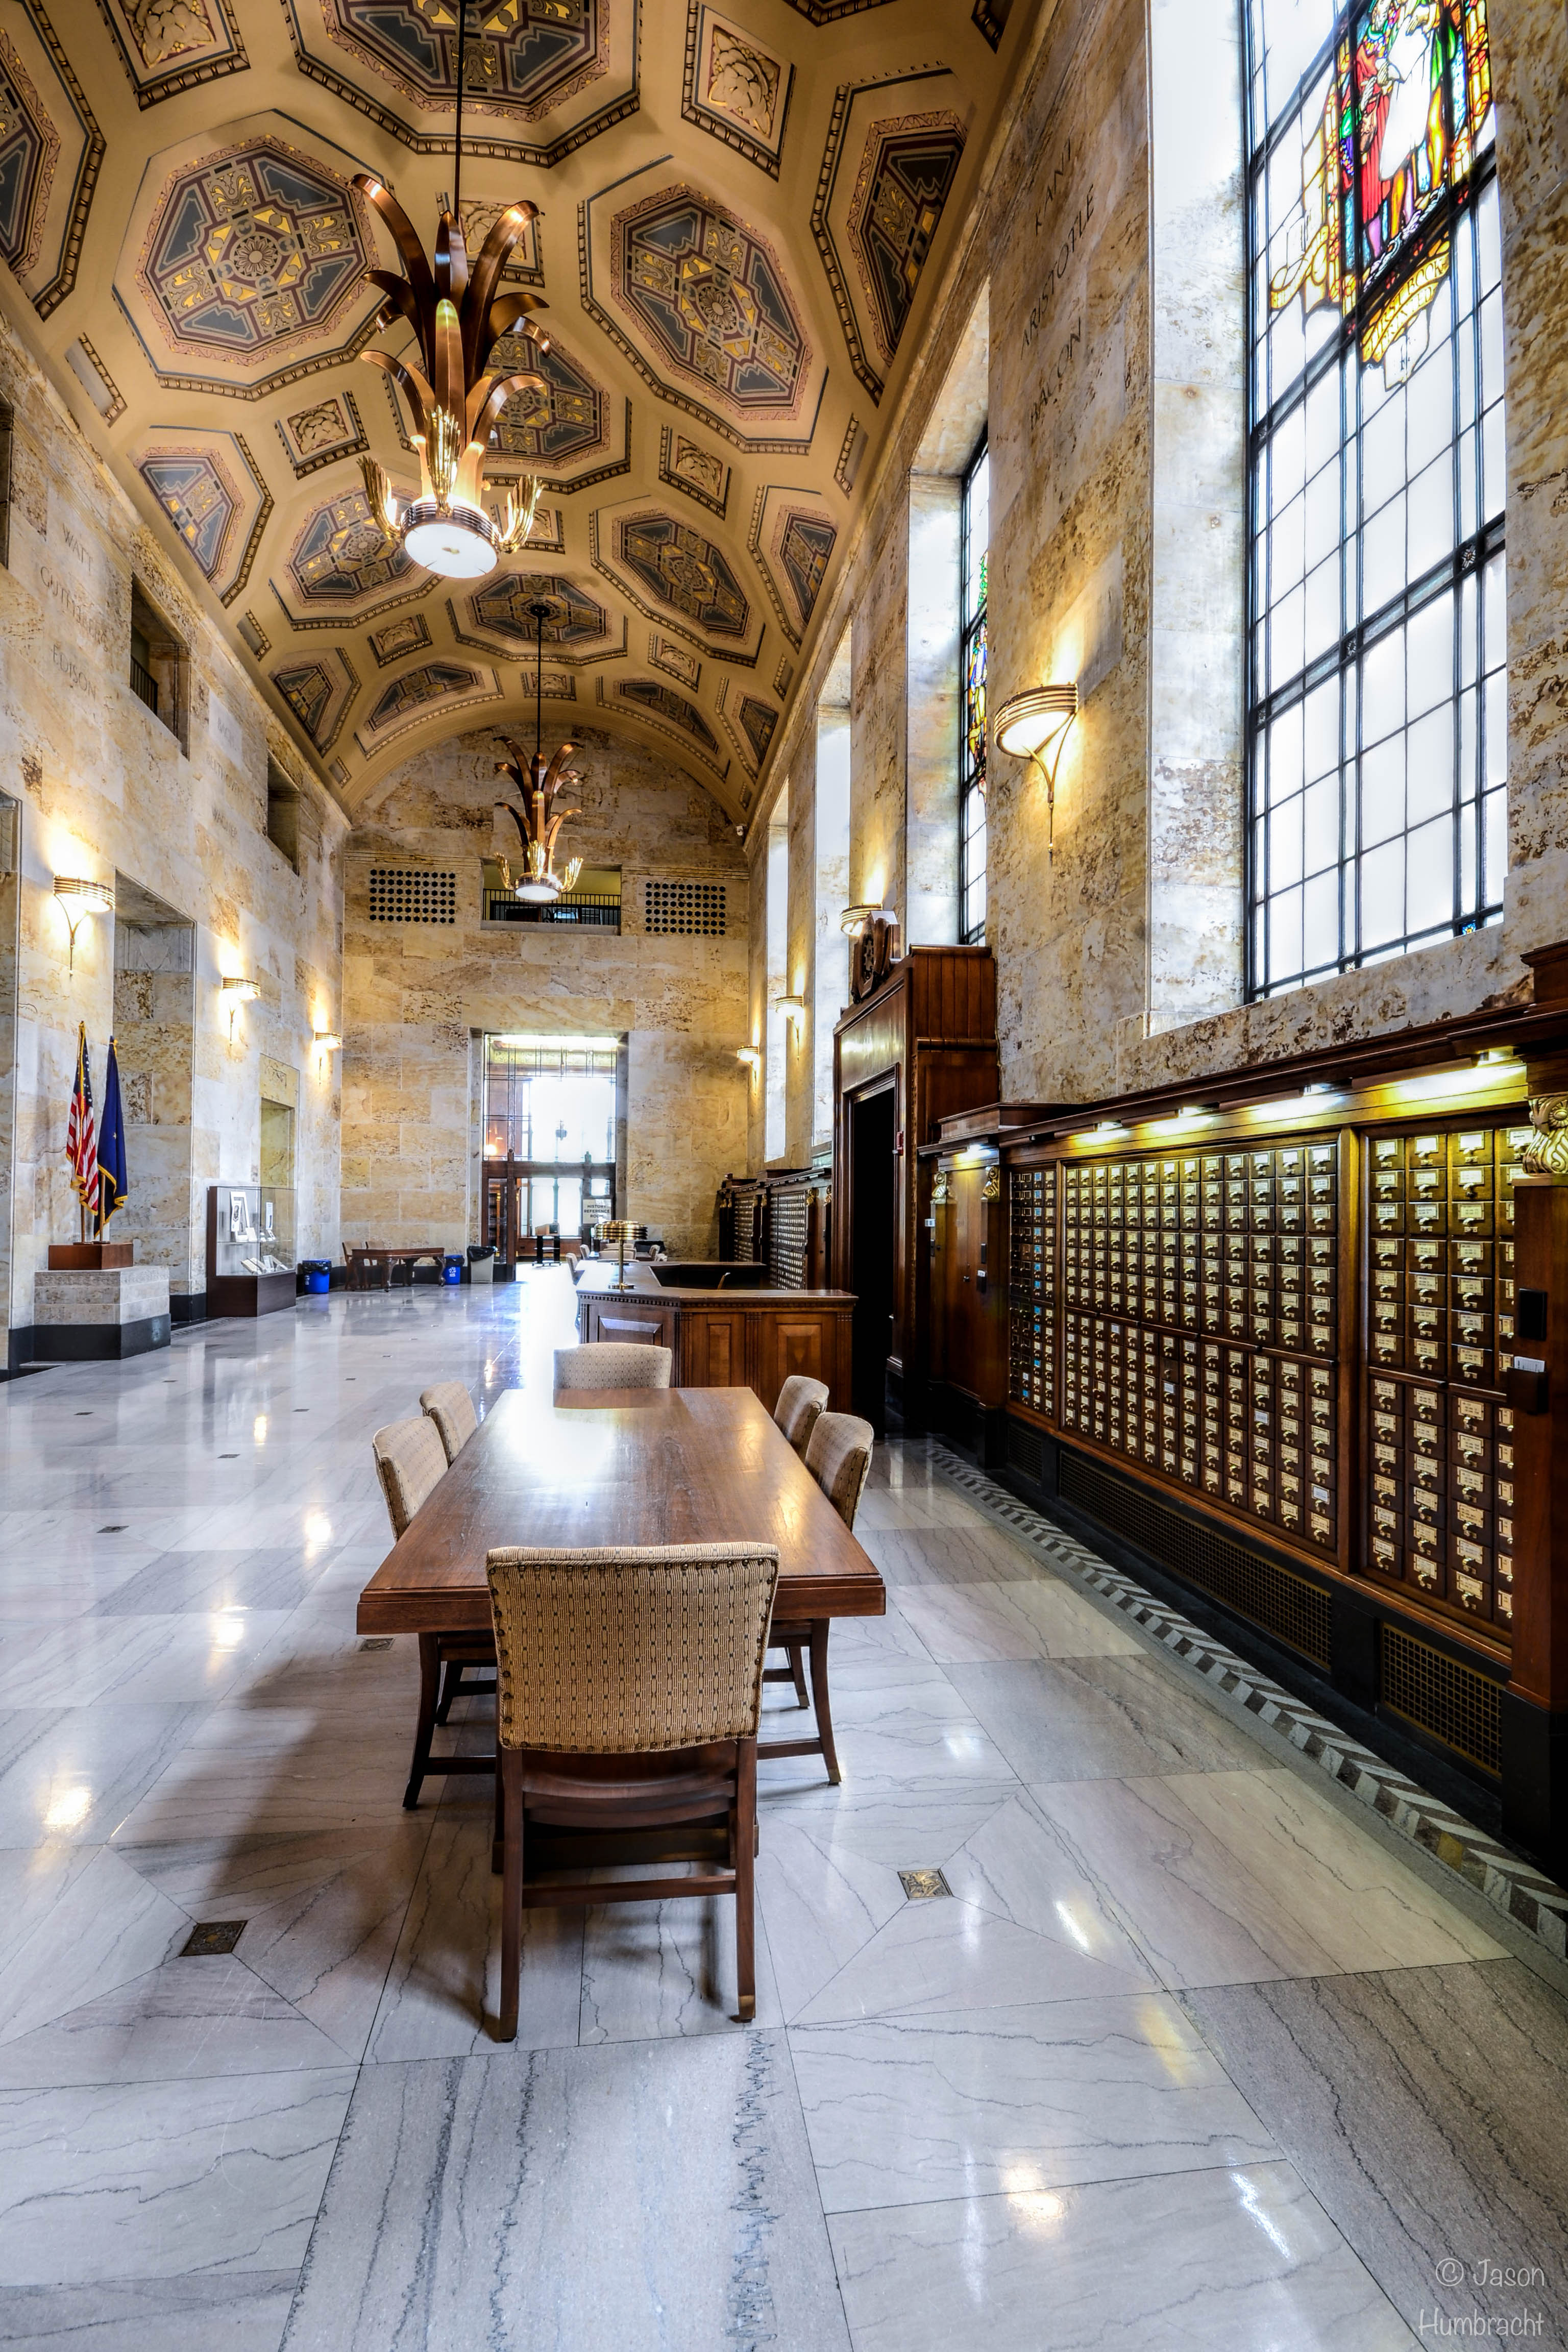 Indiana State Library | The Great Hall | Indiana Architecture | Interior Architecture | Indianapolis, Indiana | Image By Indiana Architectural Photographer Jason Humbracht